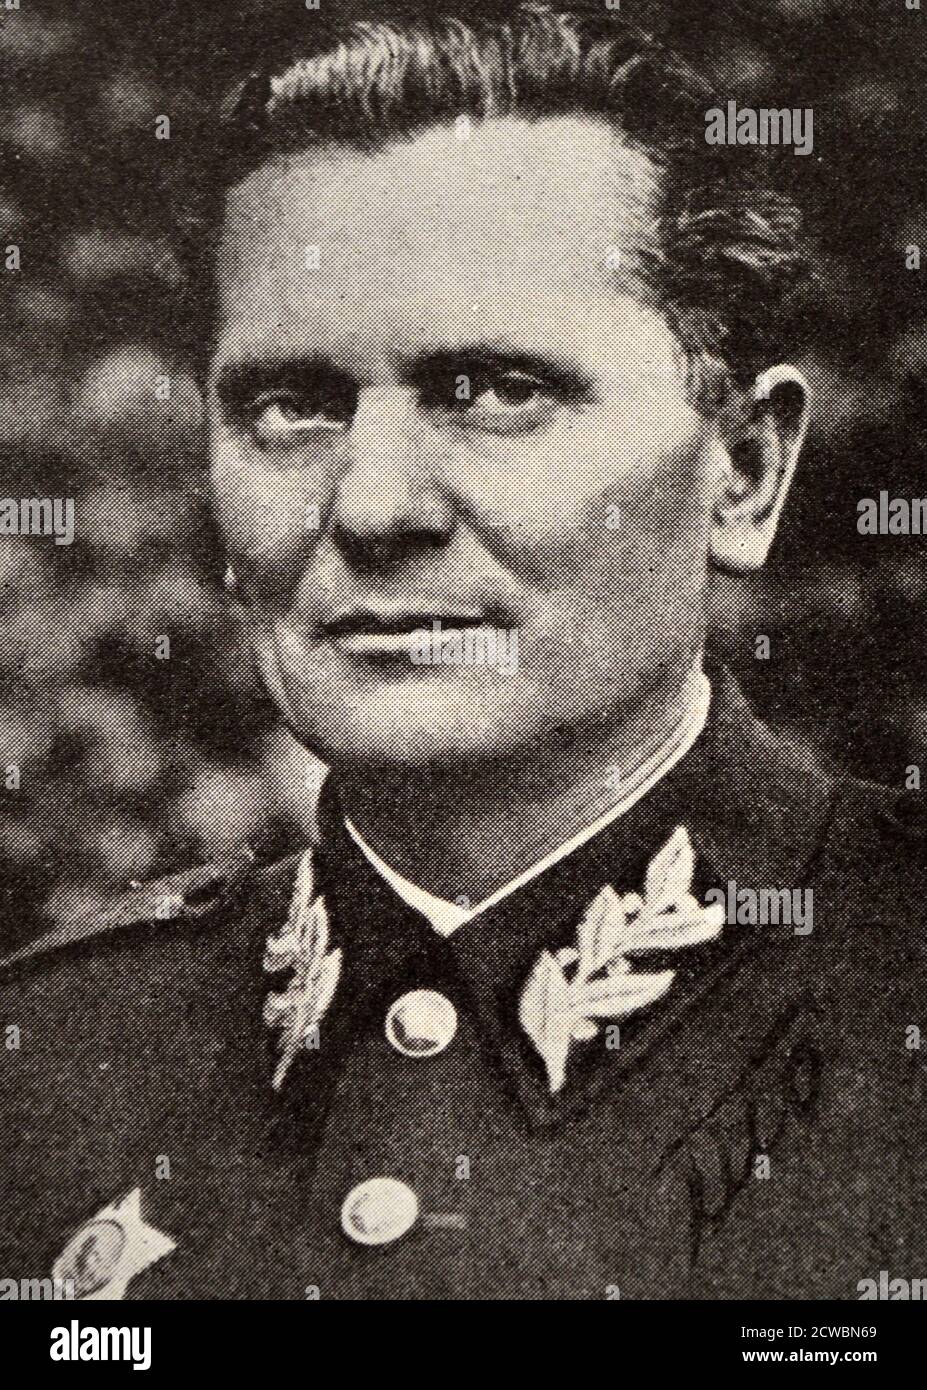 Black and white photograph of Marshal Josip Tito (1892-1980), head of the People's Federal Republic of Yugoslavia. Stock Photo